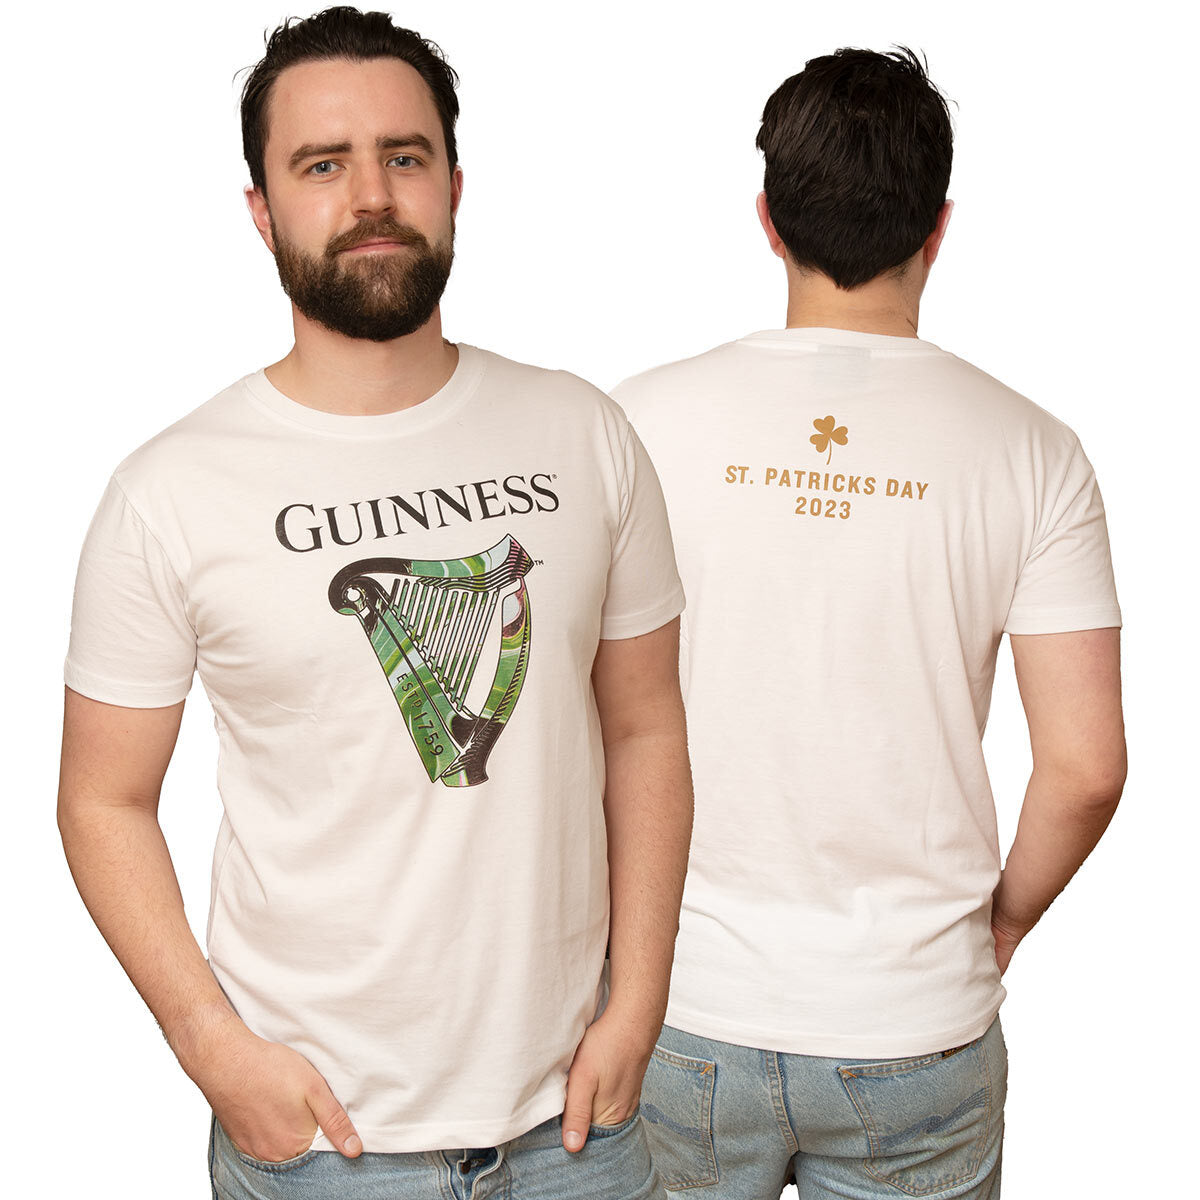 Limited edition Guinness St. Patrick's Day St. Patrick's Day Limited Edition Sweatshirt & White T-shirt Collection t-shirt.